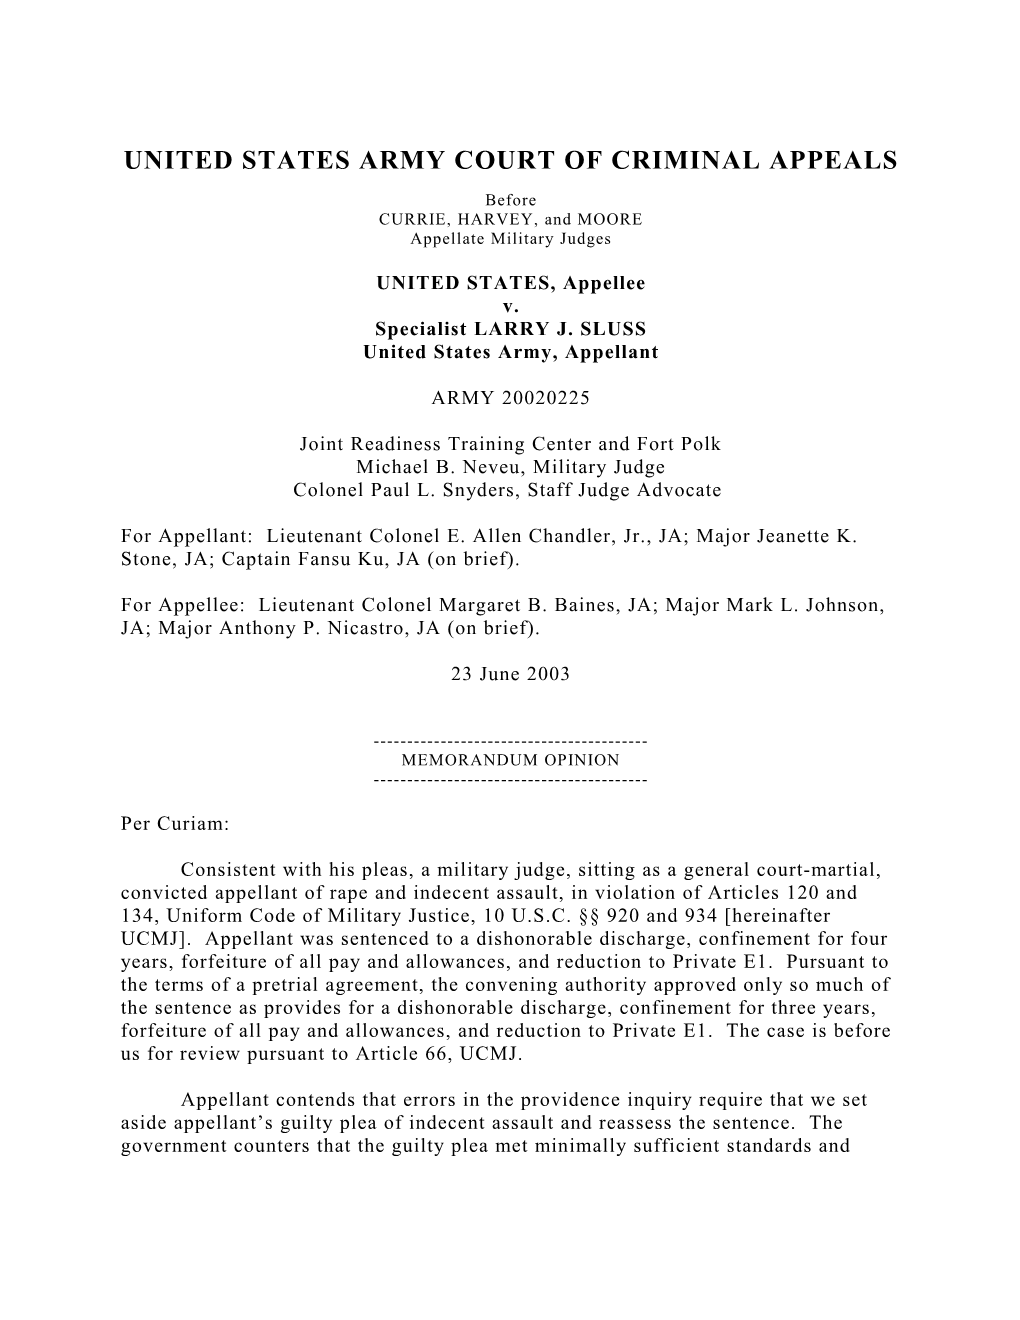 United States Army Court of Criminal Appeals s1